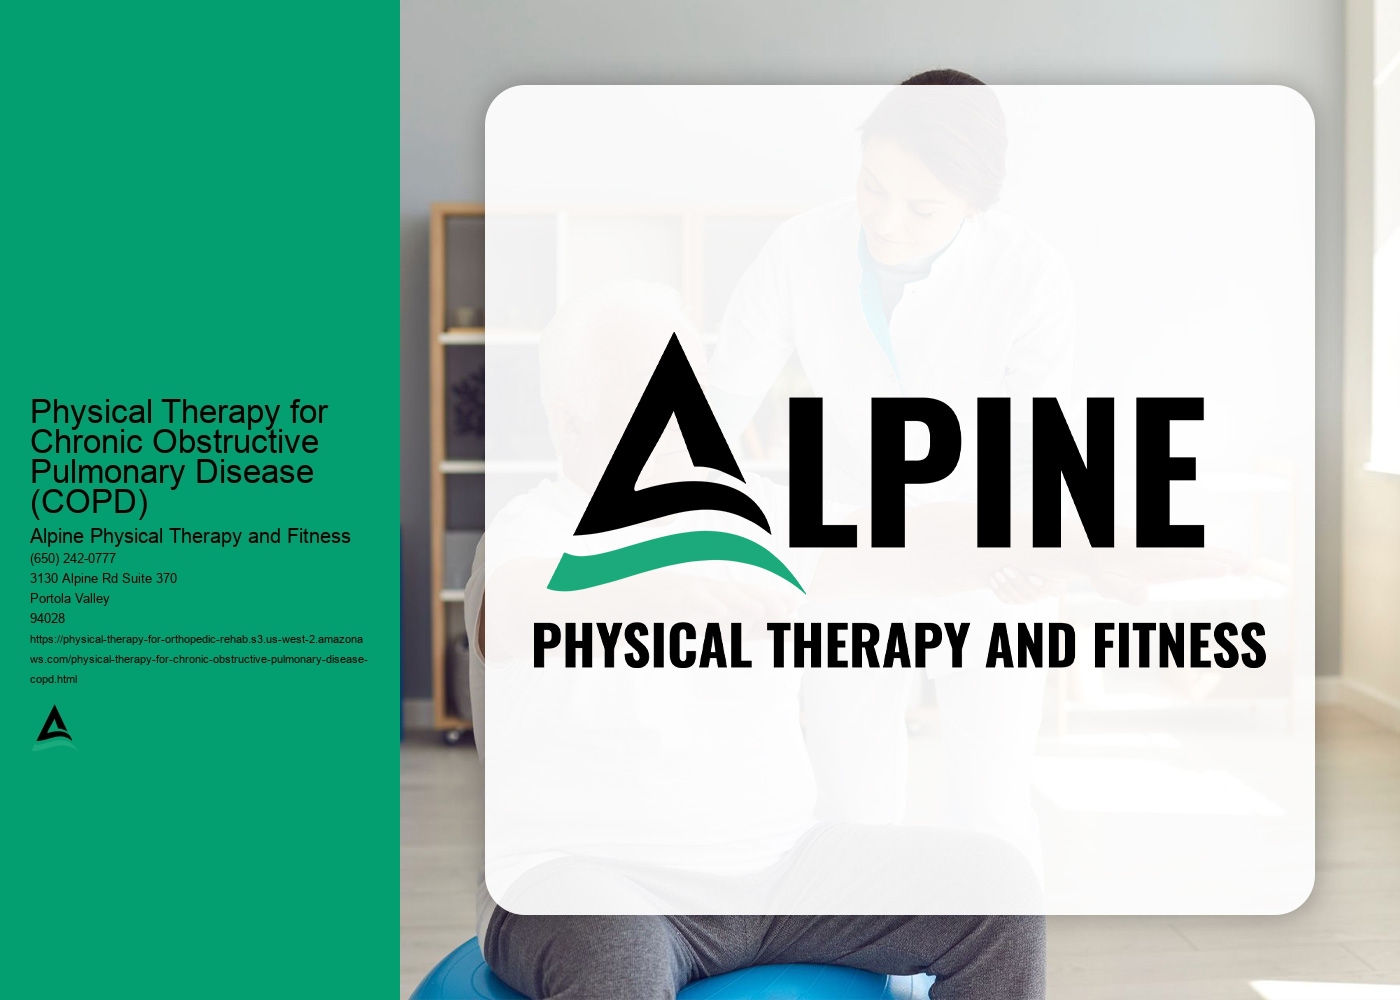 Can physical therapy improve lung function in individuals with COPD?